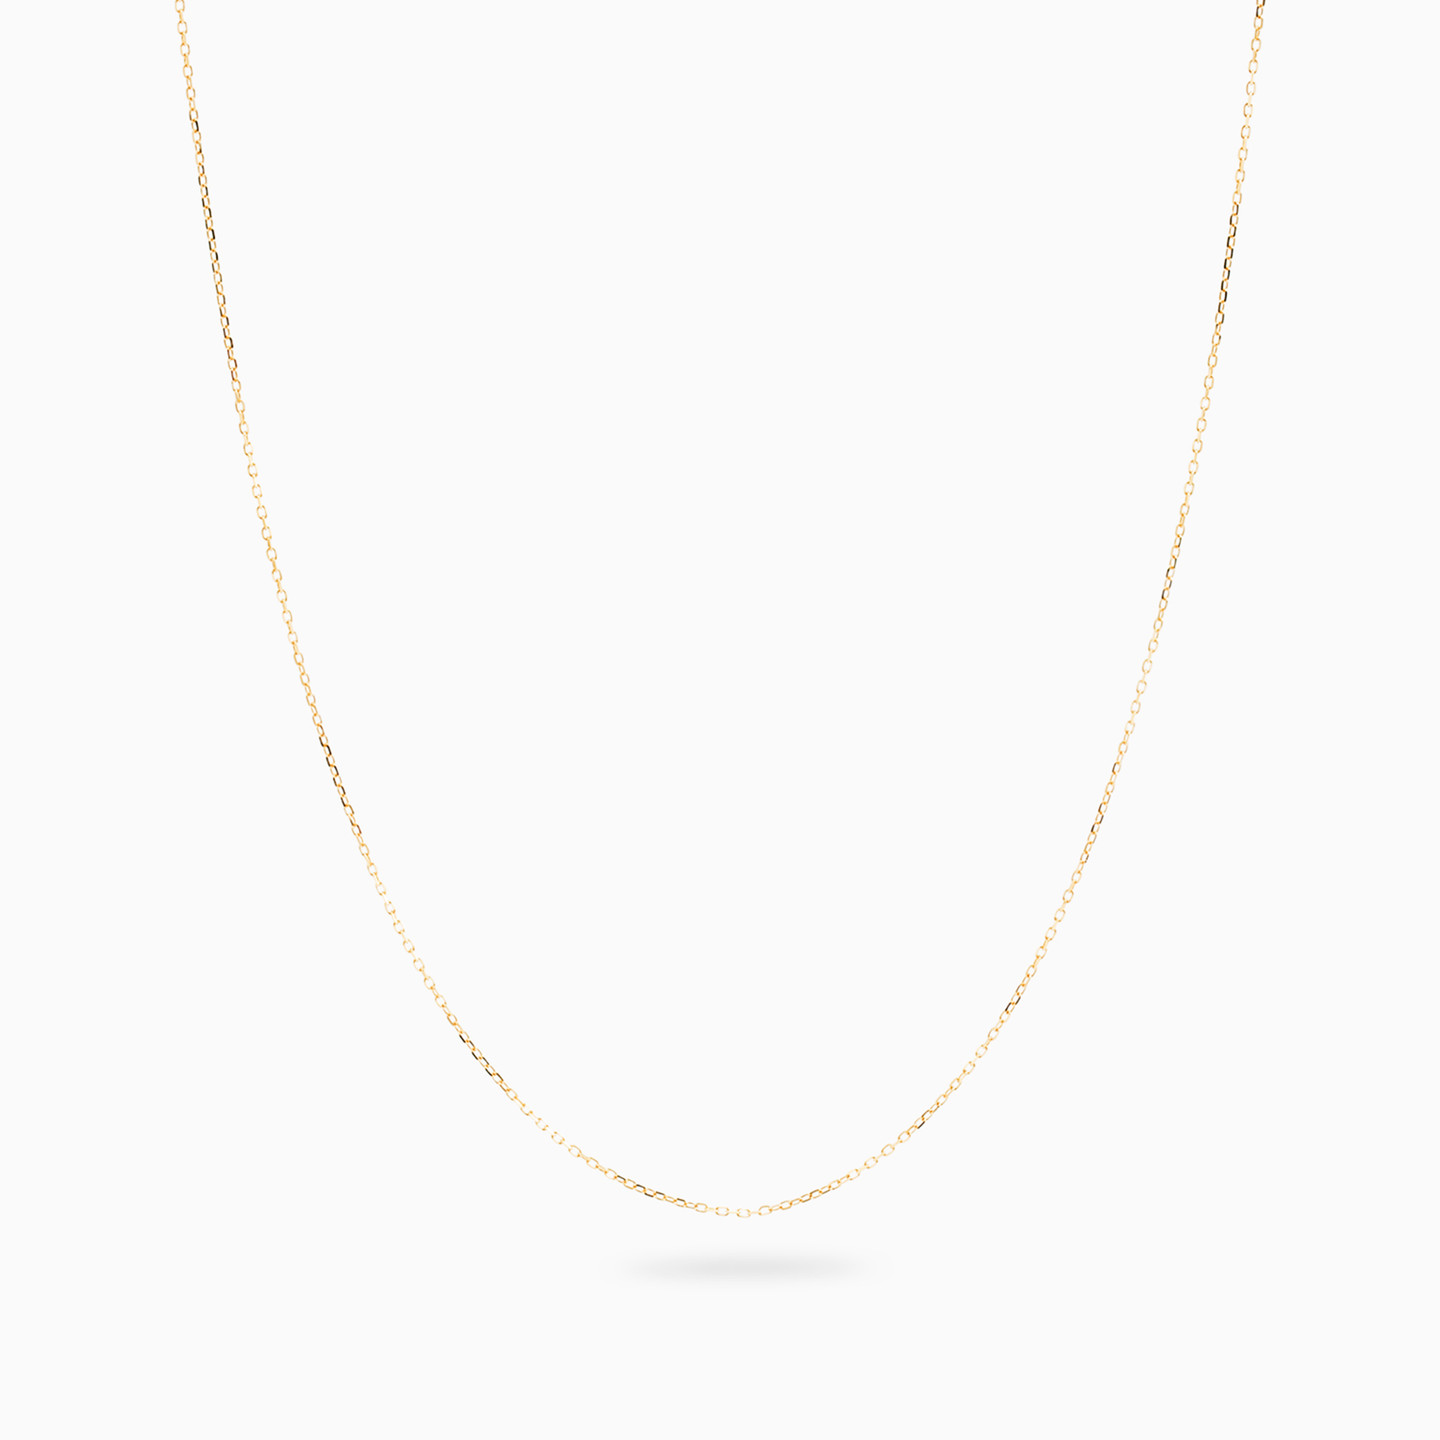 21K Gold Chain Necklace